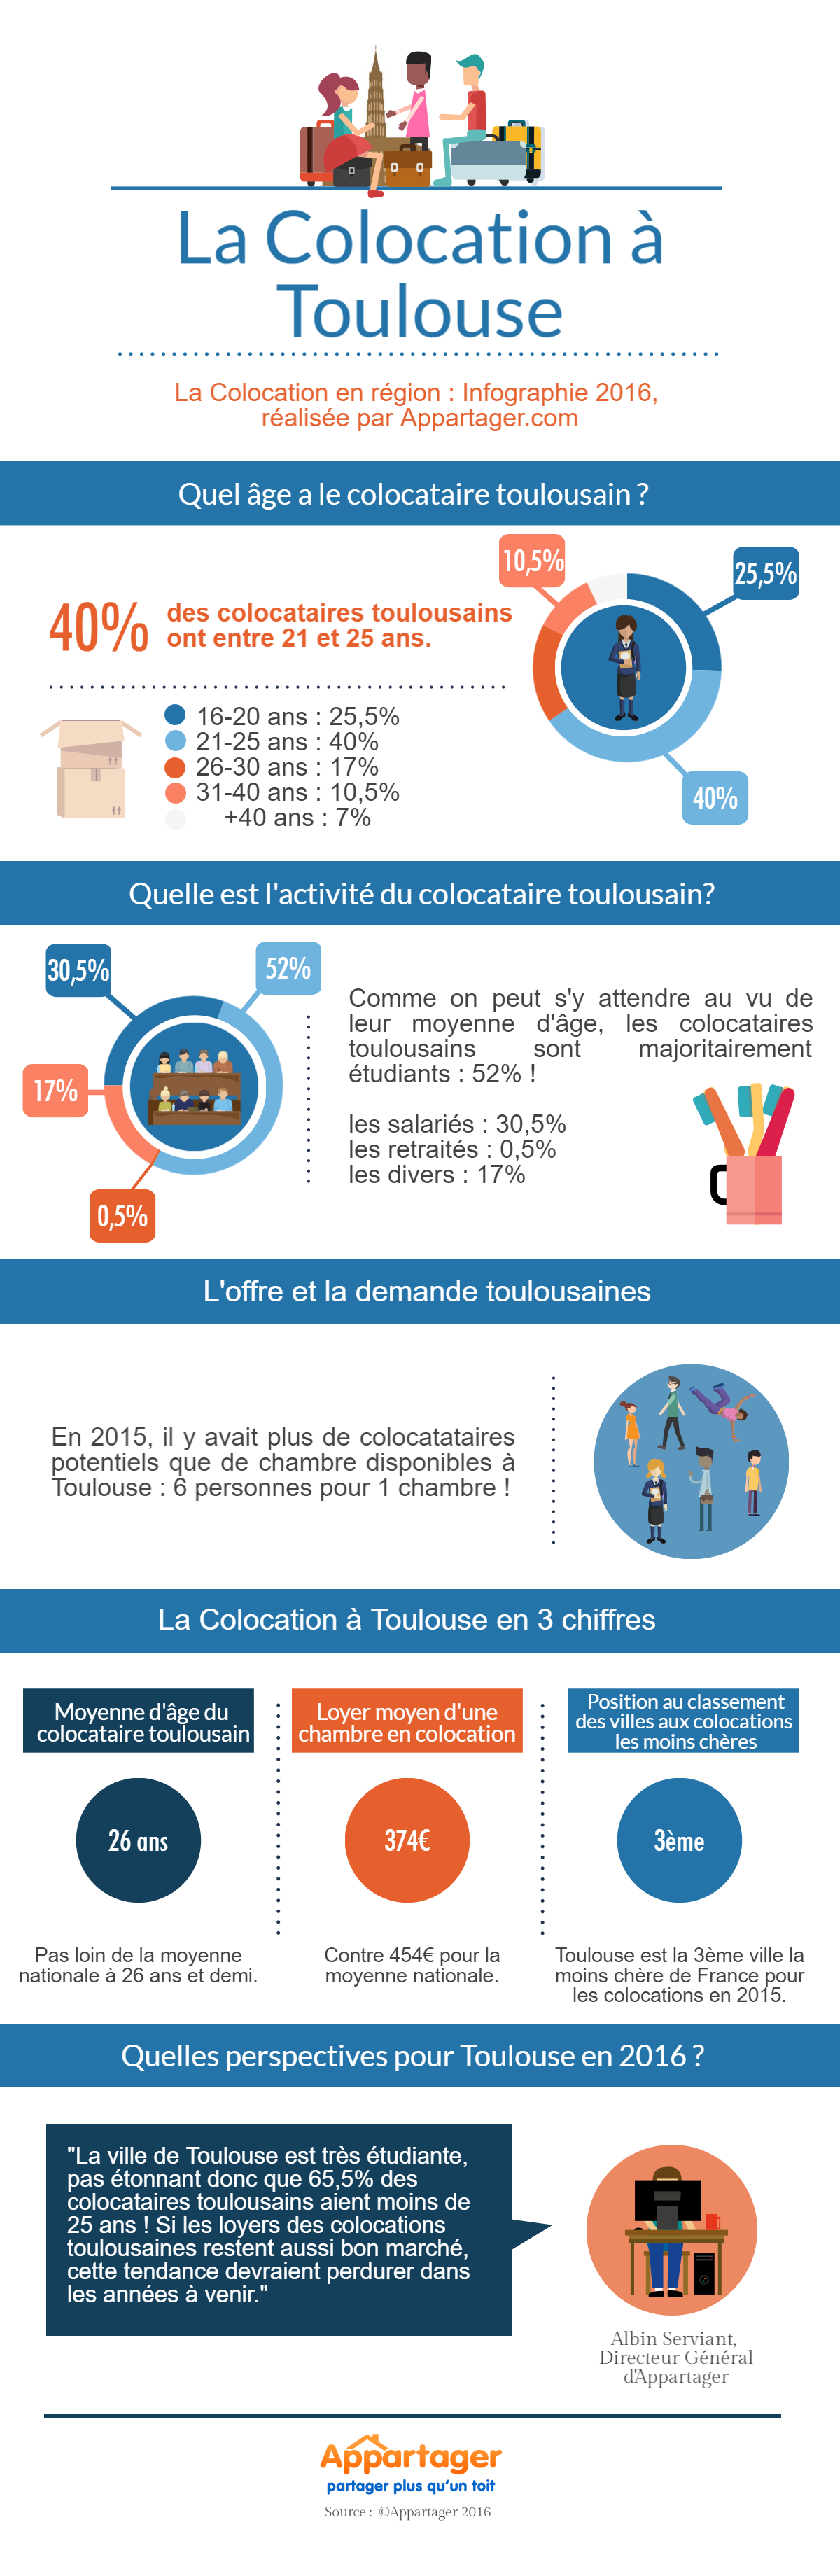 Appartager_Infographie_colocation-toulouse-2016